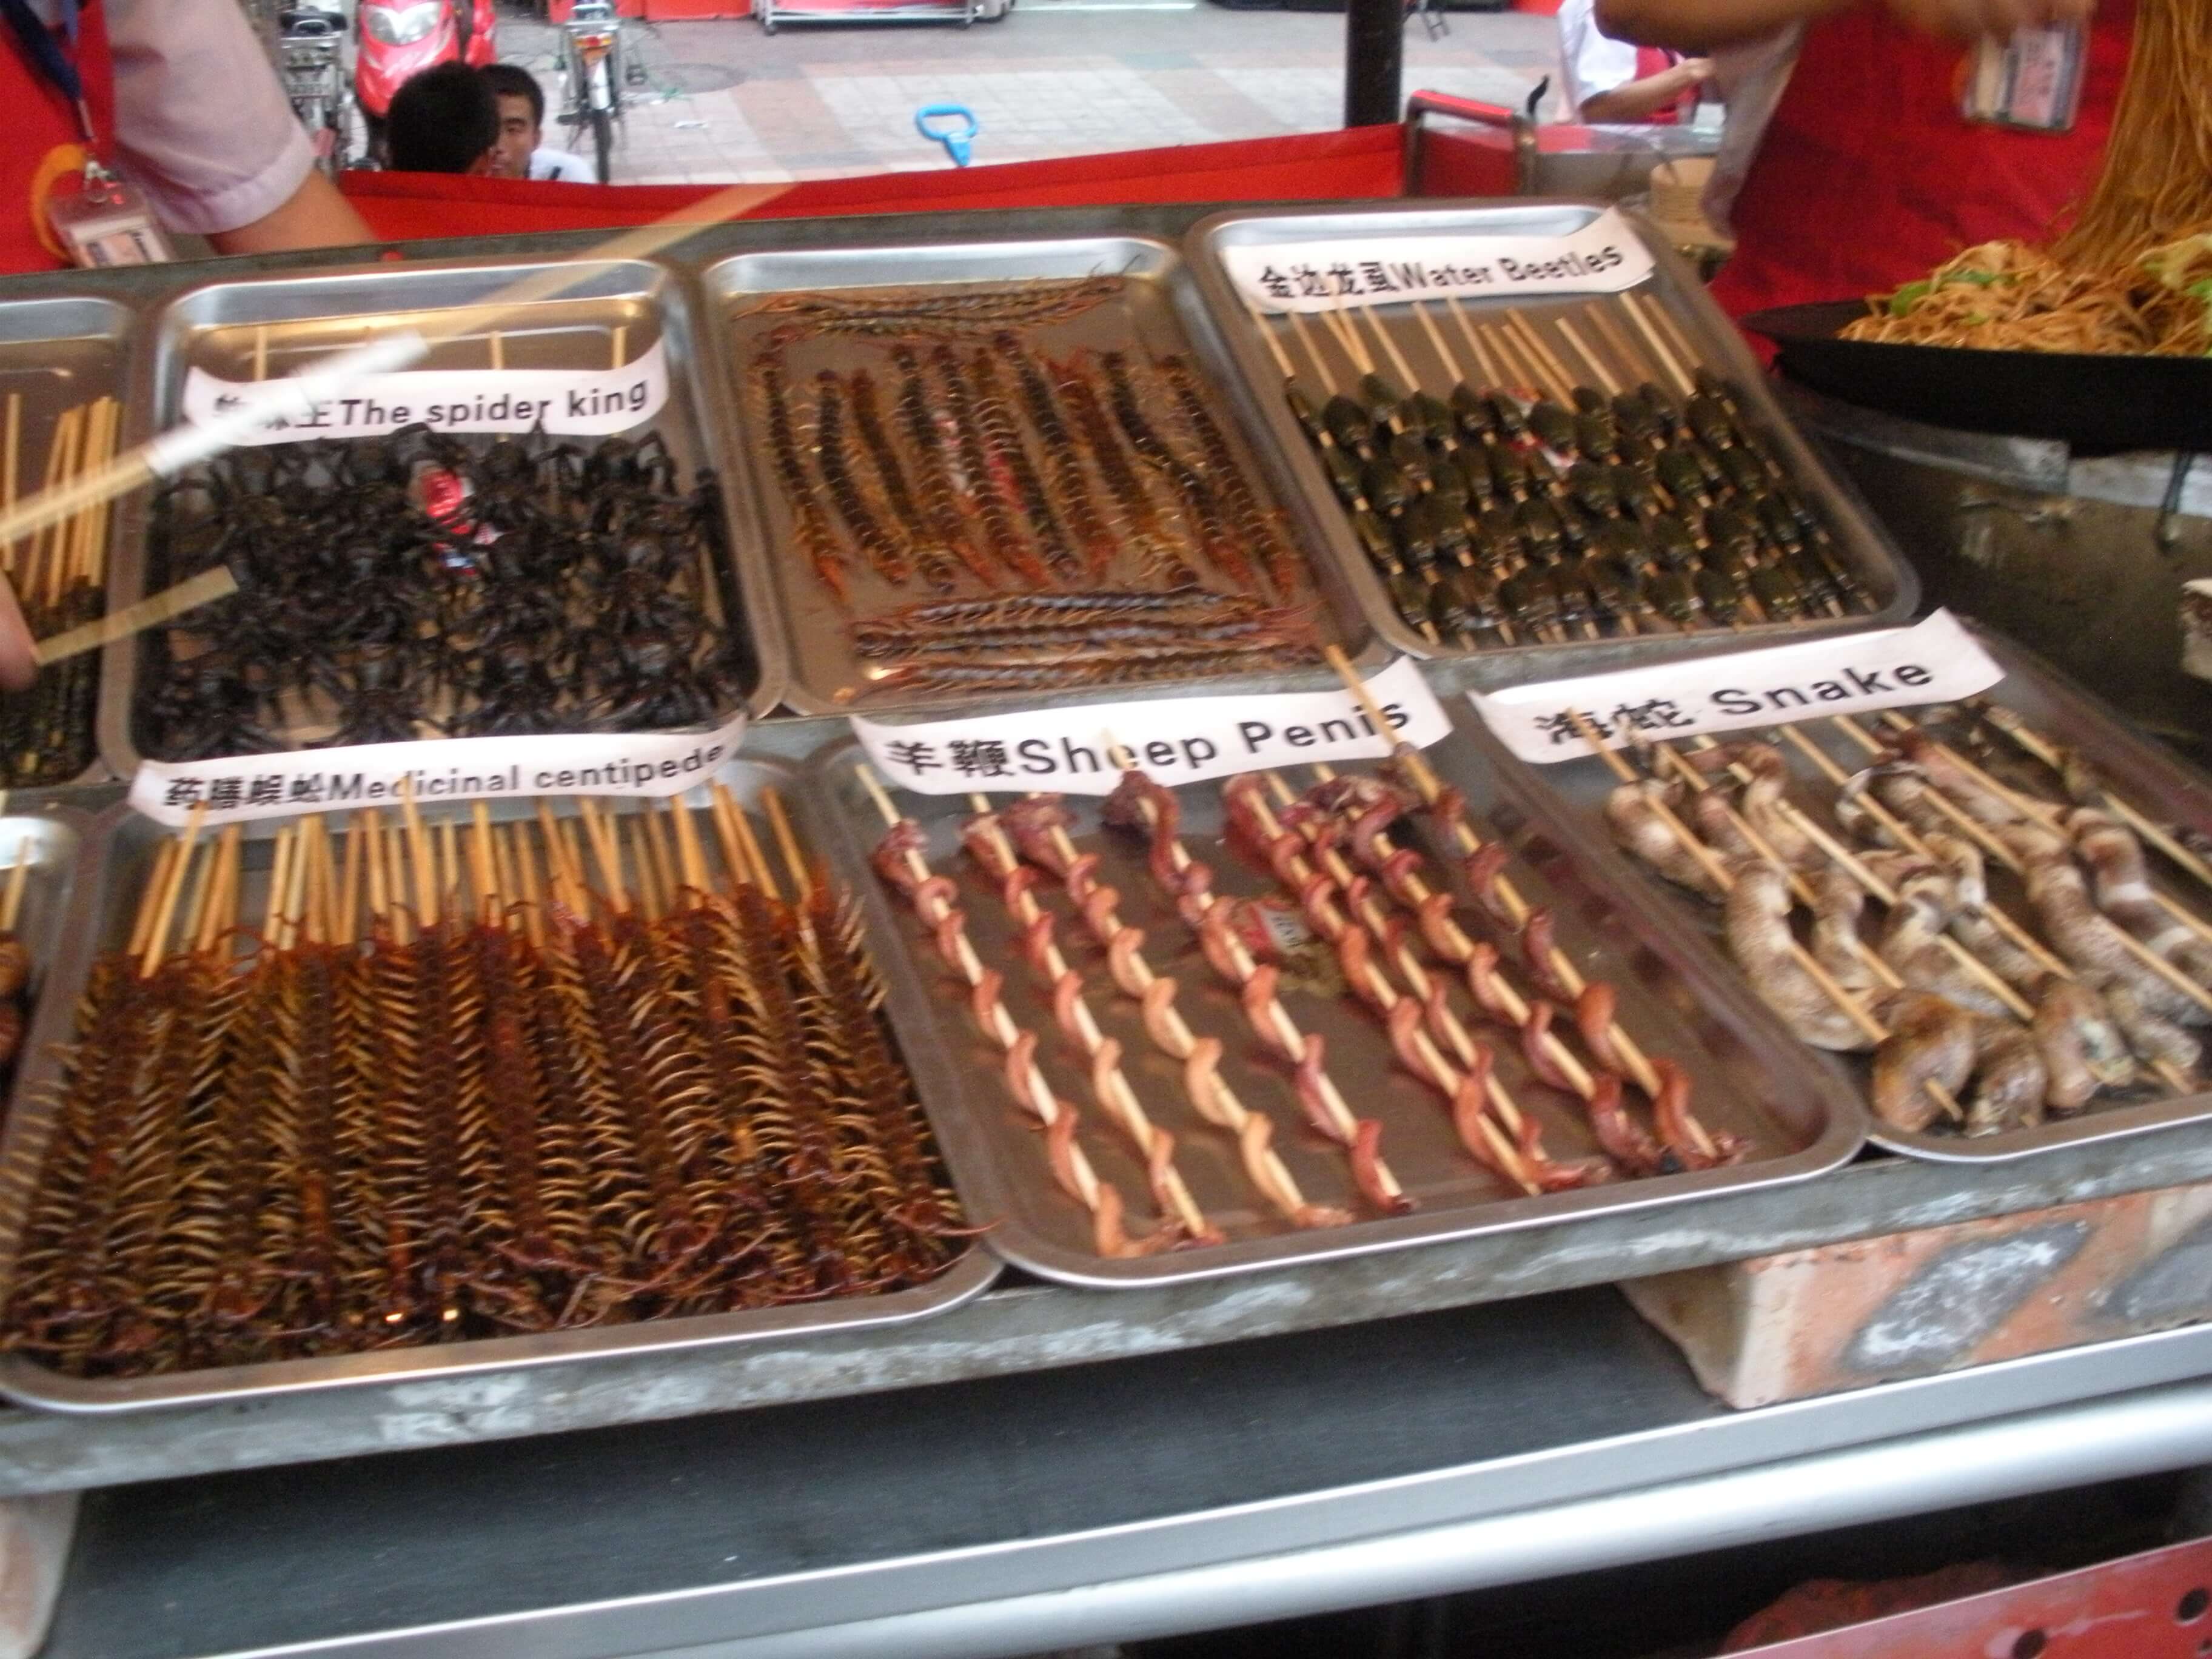 Beijing's food markets offer insect snacks